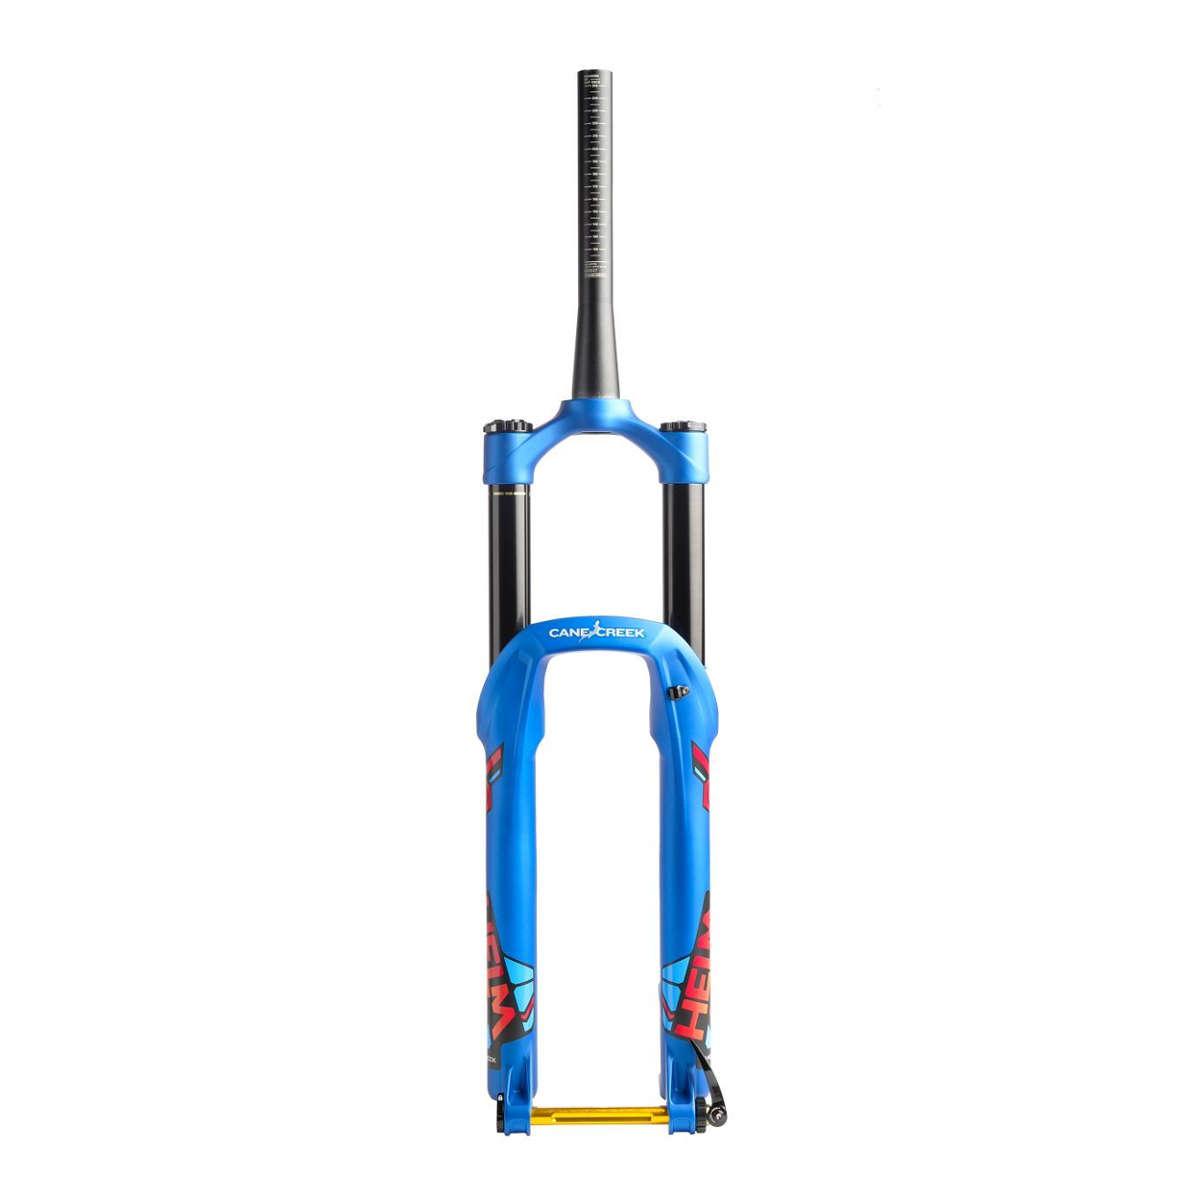 Cane Creek Suspension Fork Helm Air Blue, 27.5 Inch, Tapered, 15x110 mm (Boost)